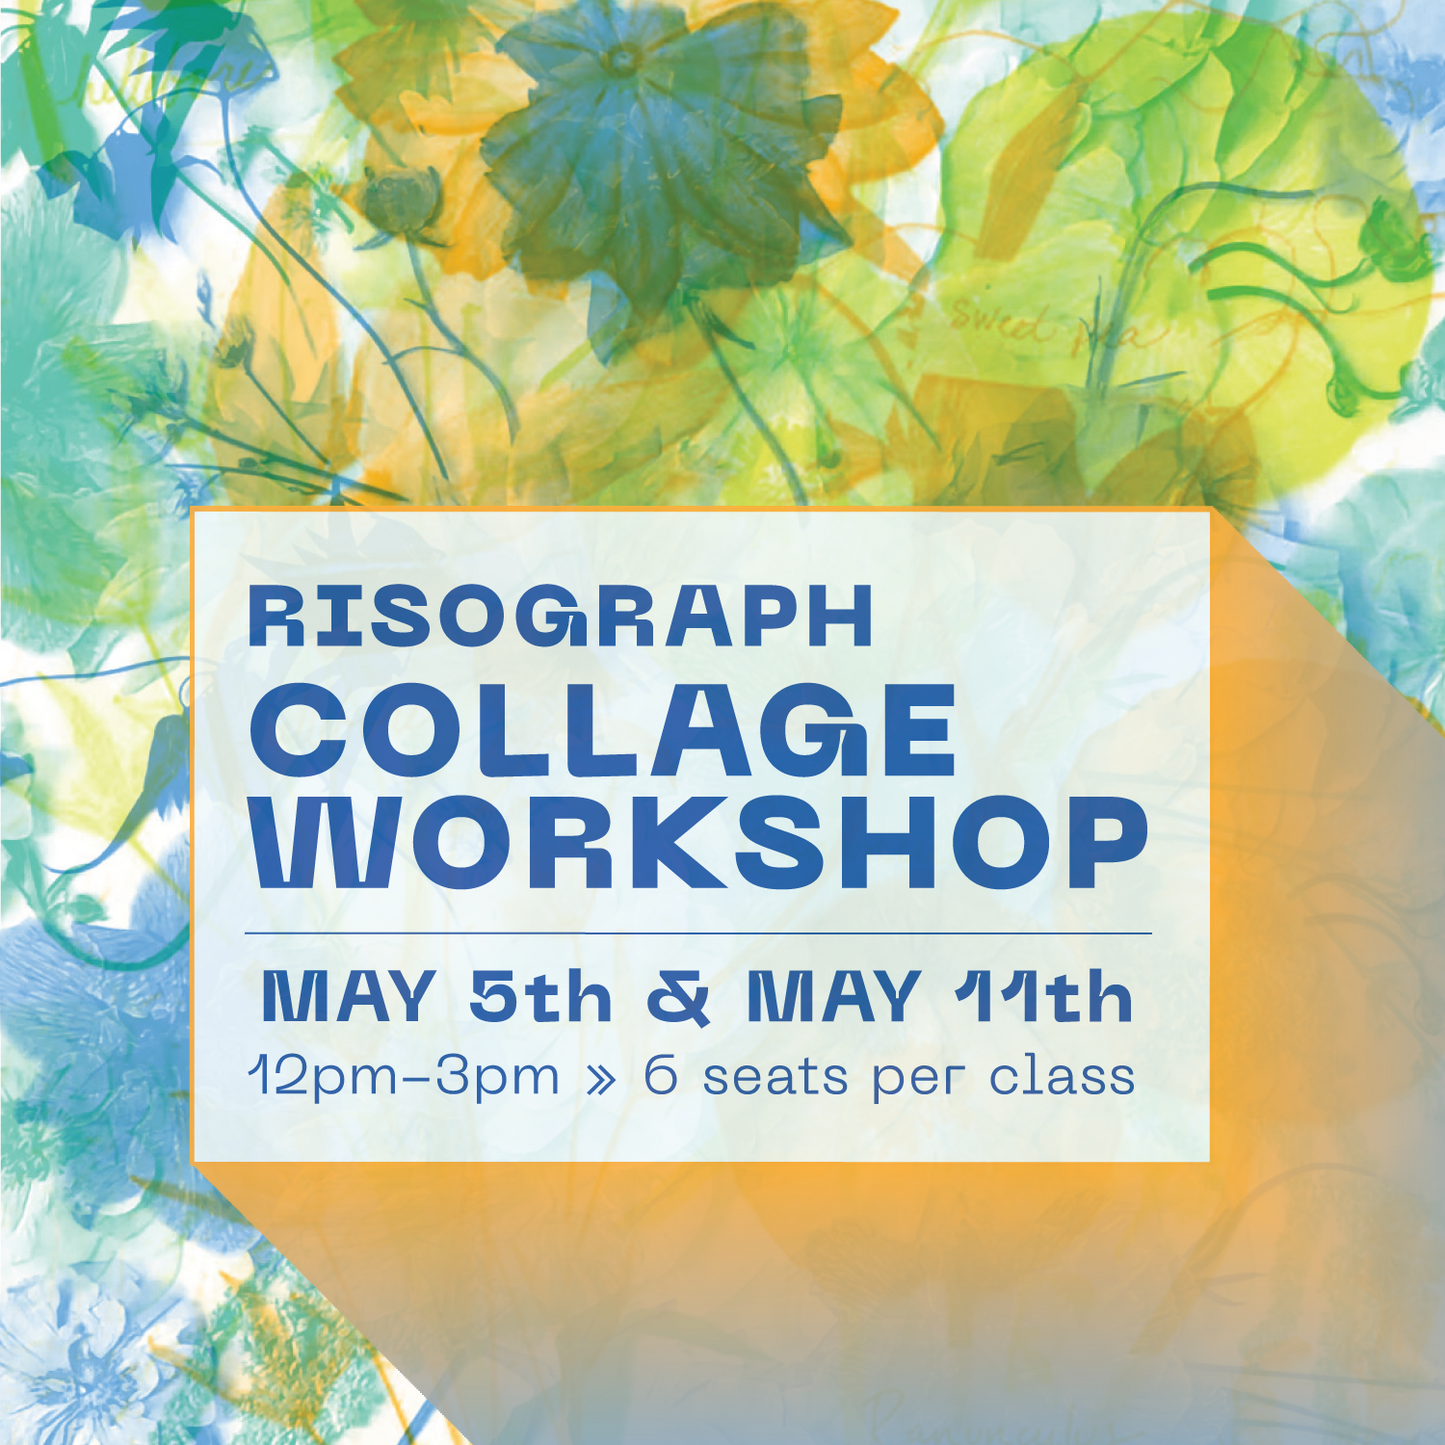 MAY 11th - Risograph Collage Workshop